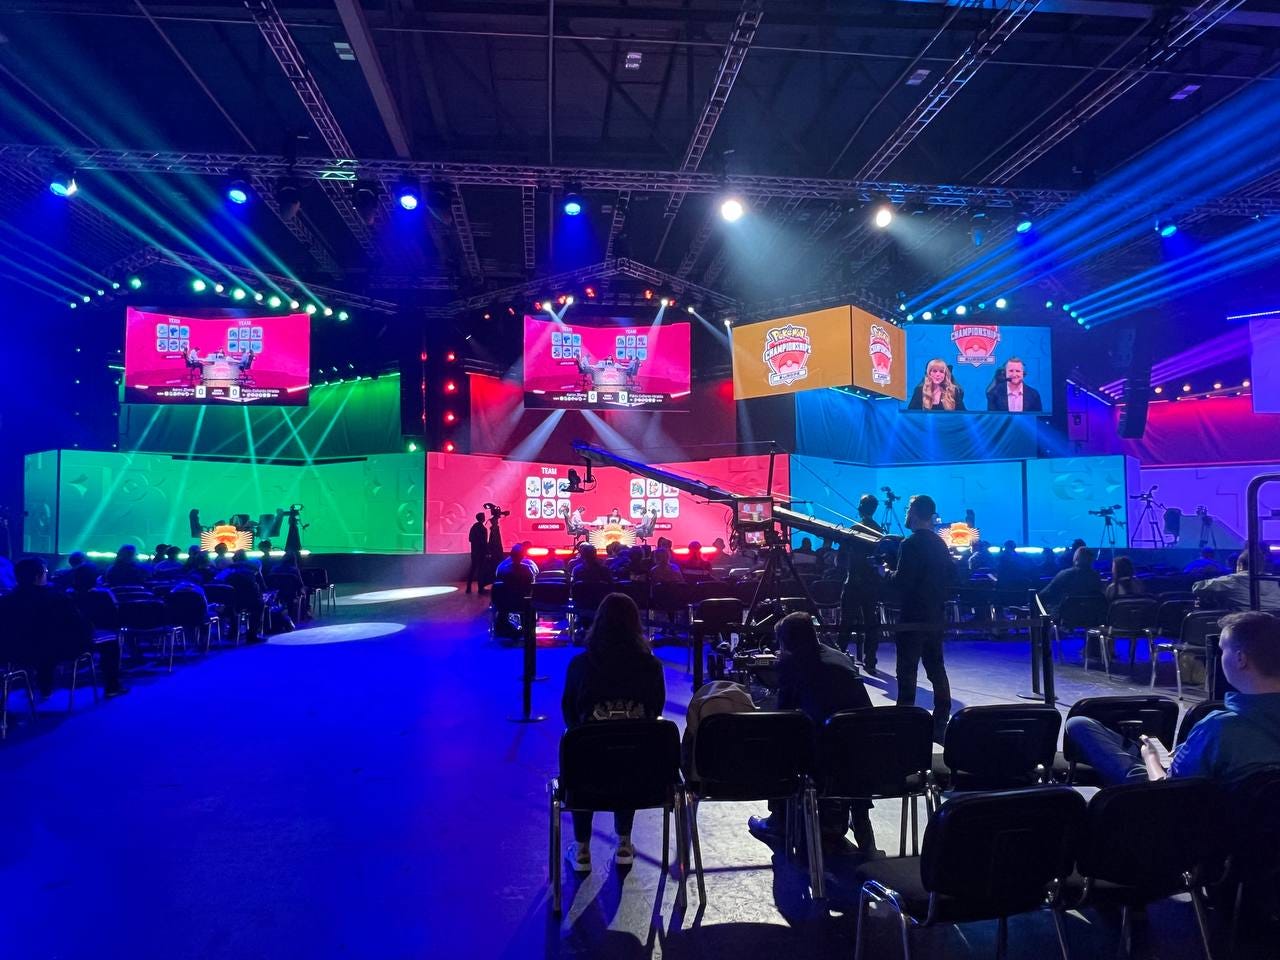 The stage was set at the Pokémon European International Championships 2023